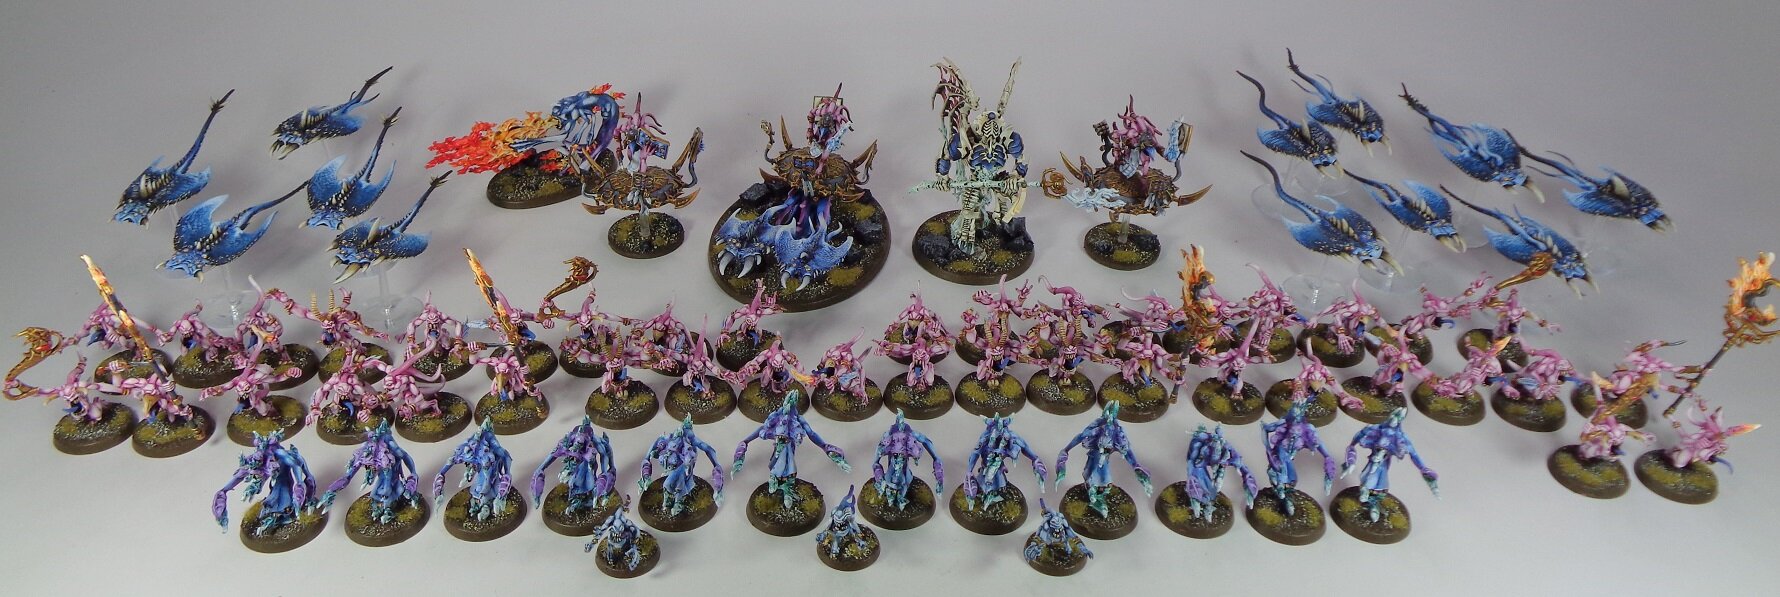 Thousand Sons Miniature Painting Commission (15).JPG